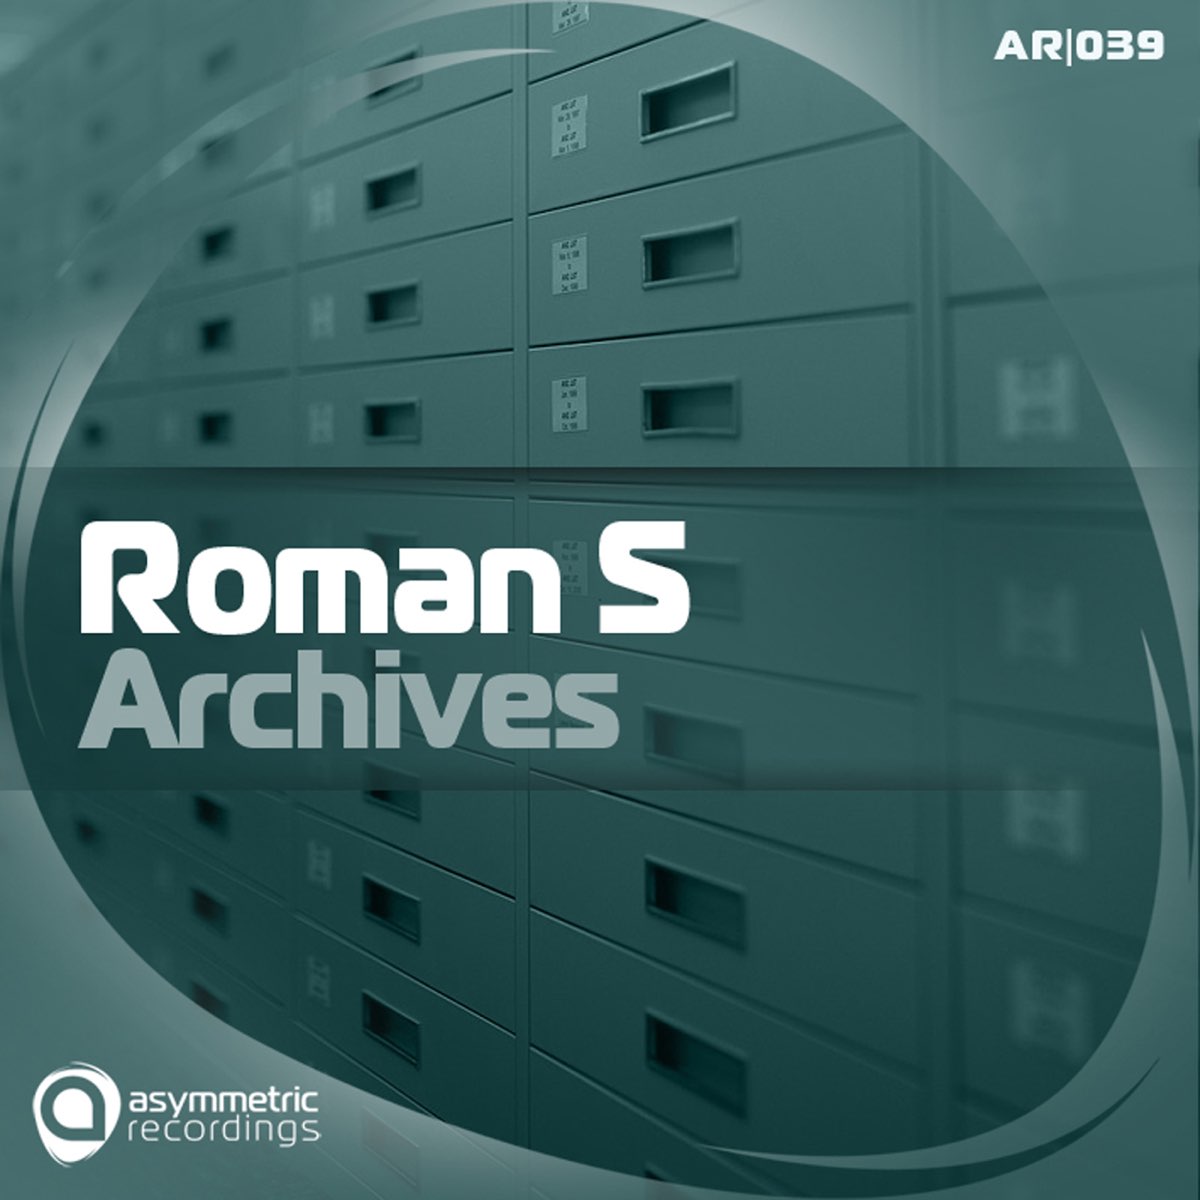 Archives s. Romano Archives.